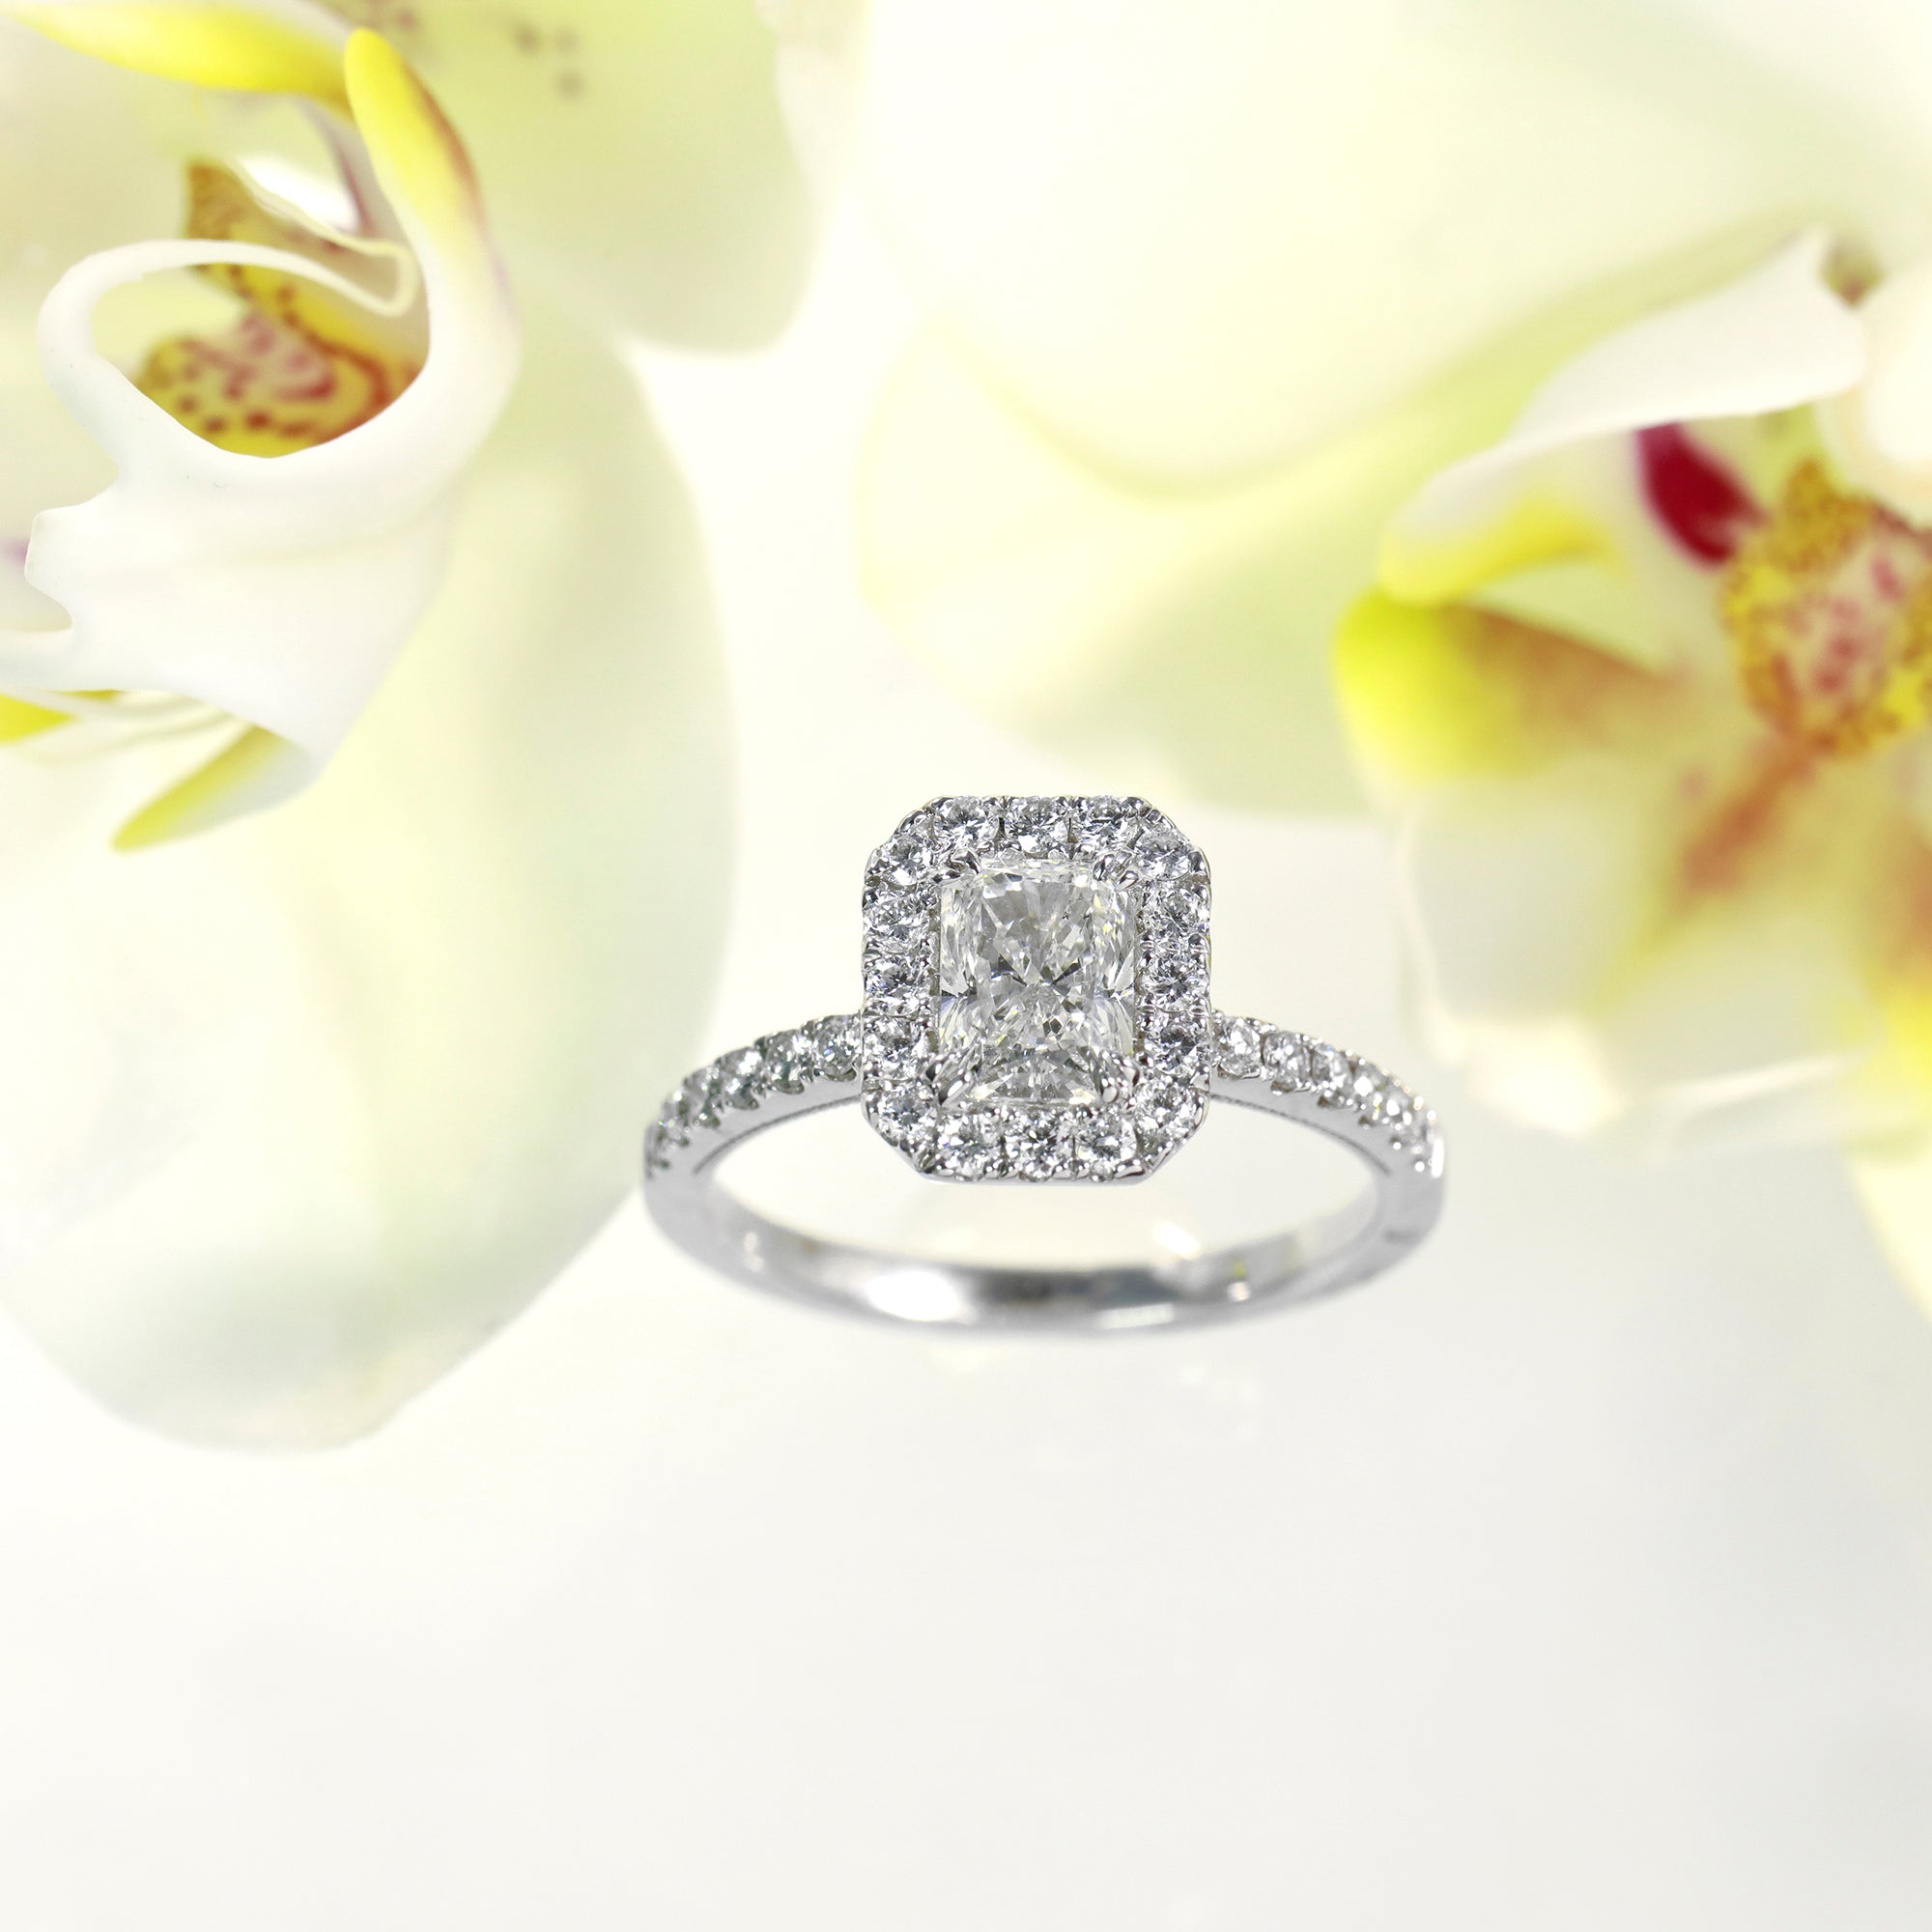 14K white gold diamond engagement ring featuring one rectangular radiant diamond, and a diamond halo and side stones with round brilliant diamonds.